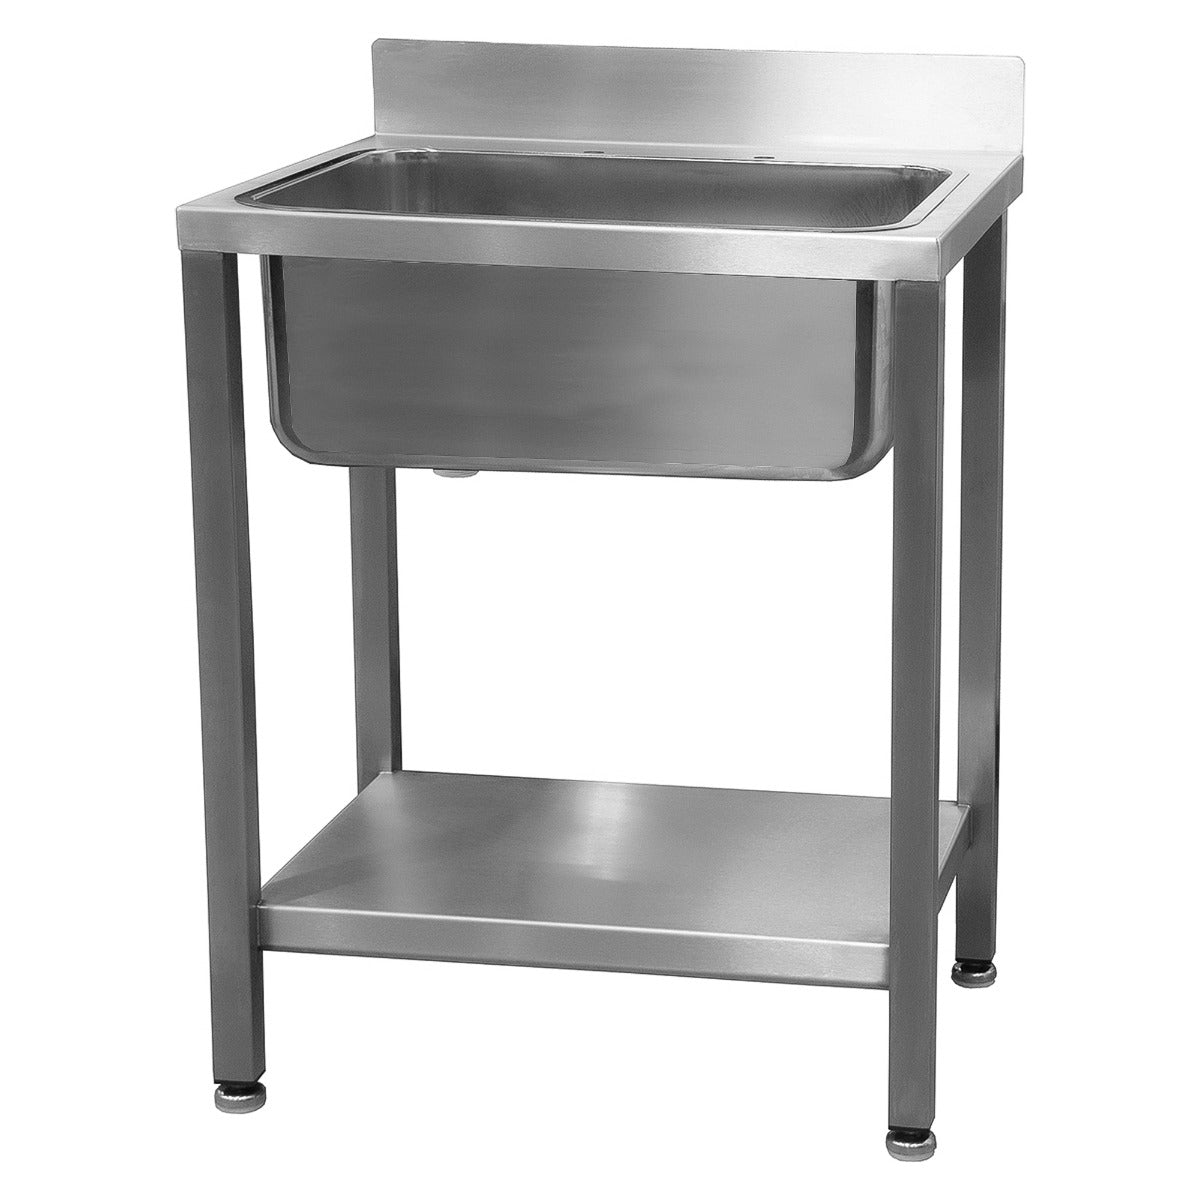 Stainless steel freestanding sink with upstand